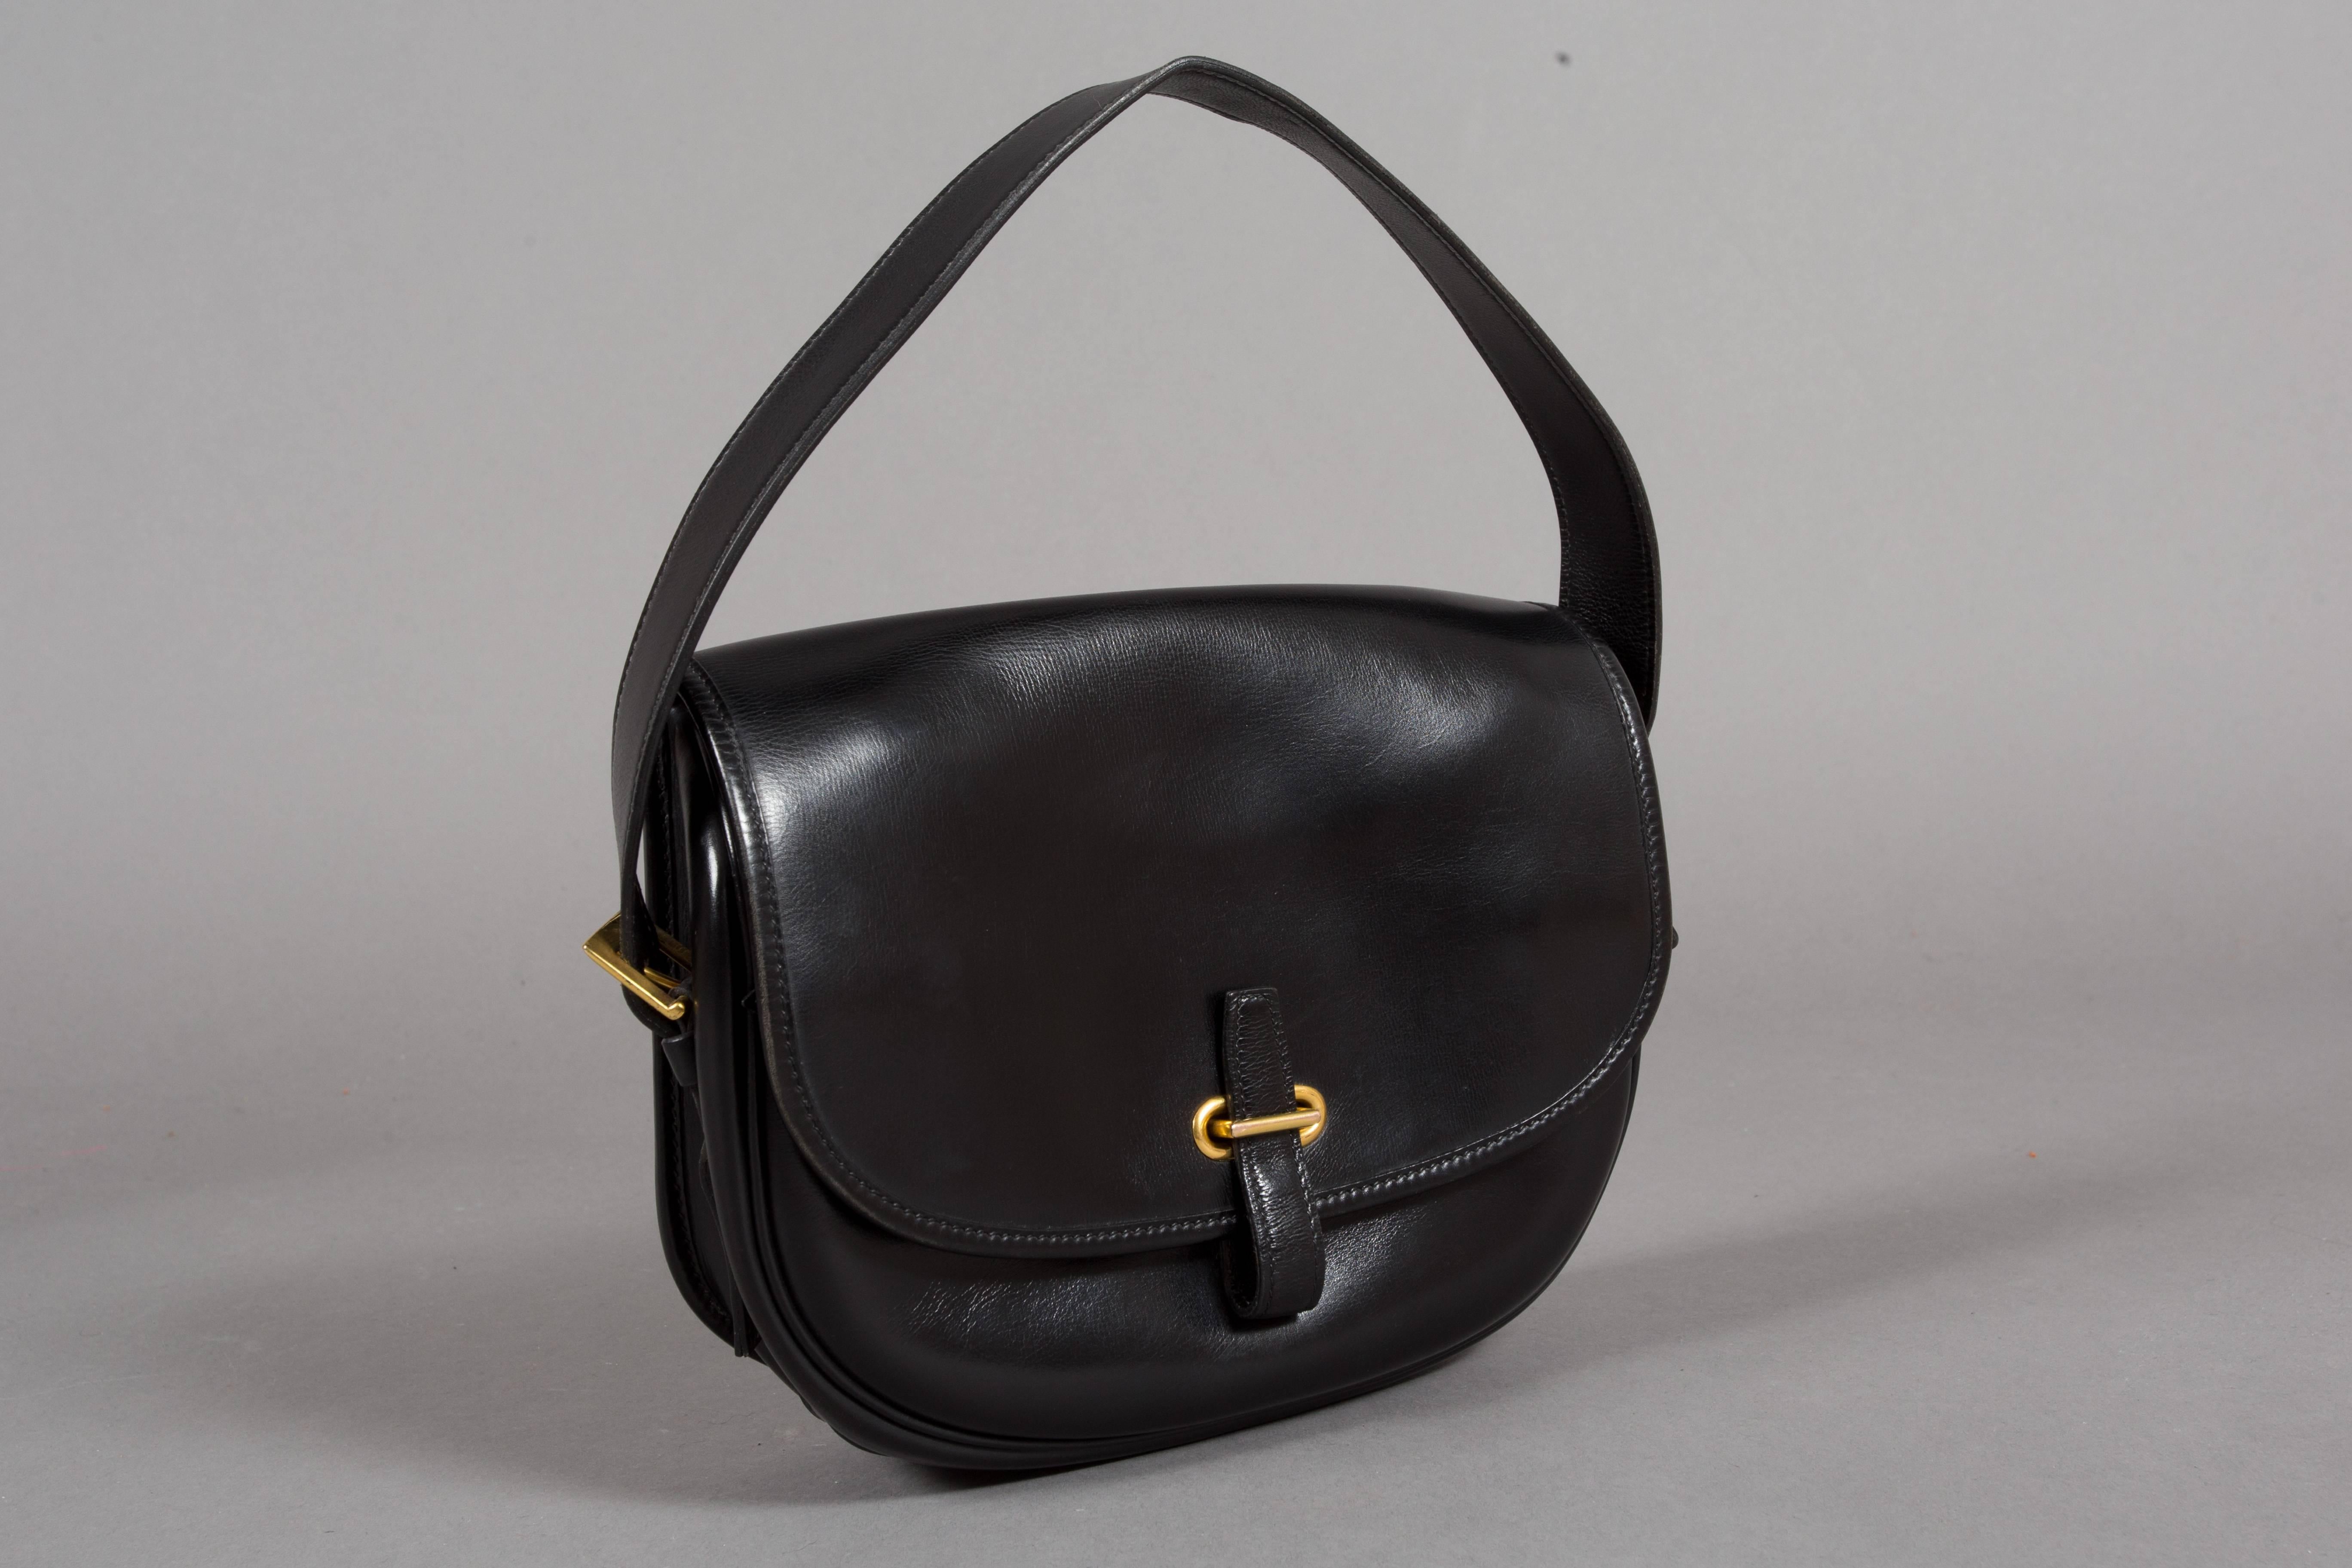 A fine and rare Hermes 'Balle de Golf' bag. Made in France for Bonwit Teller in 1972. The bag is in black box leather with gold hardware, the shoulder strap is adjustable with buckle closure on both sides. One main compartment with an open pocket